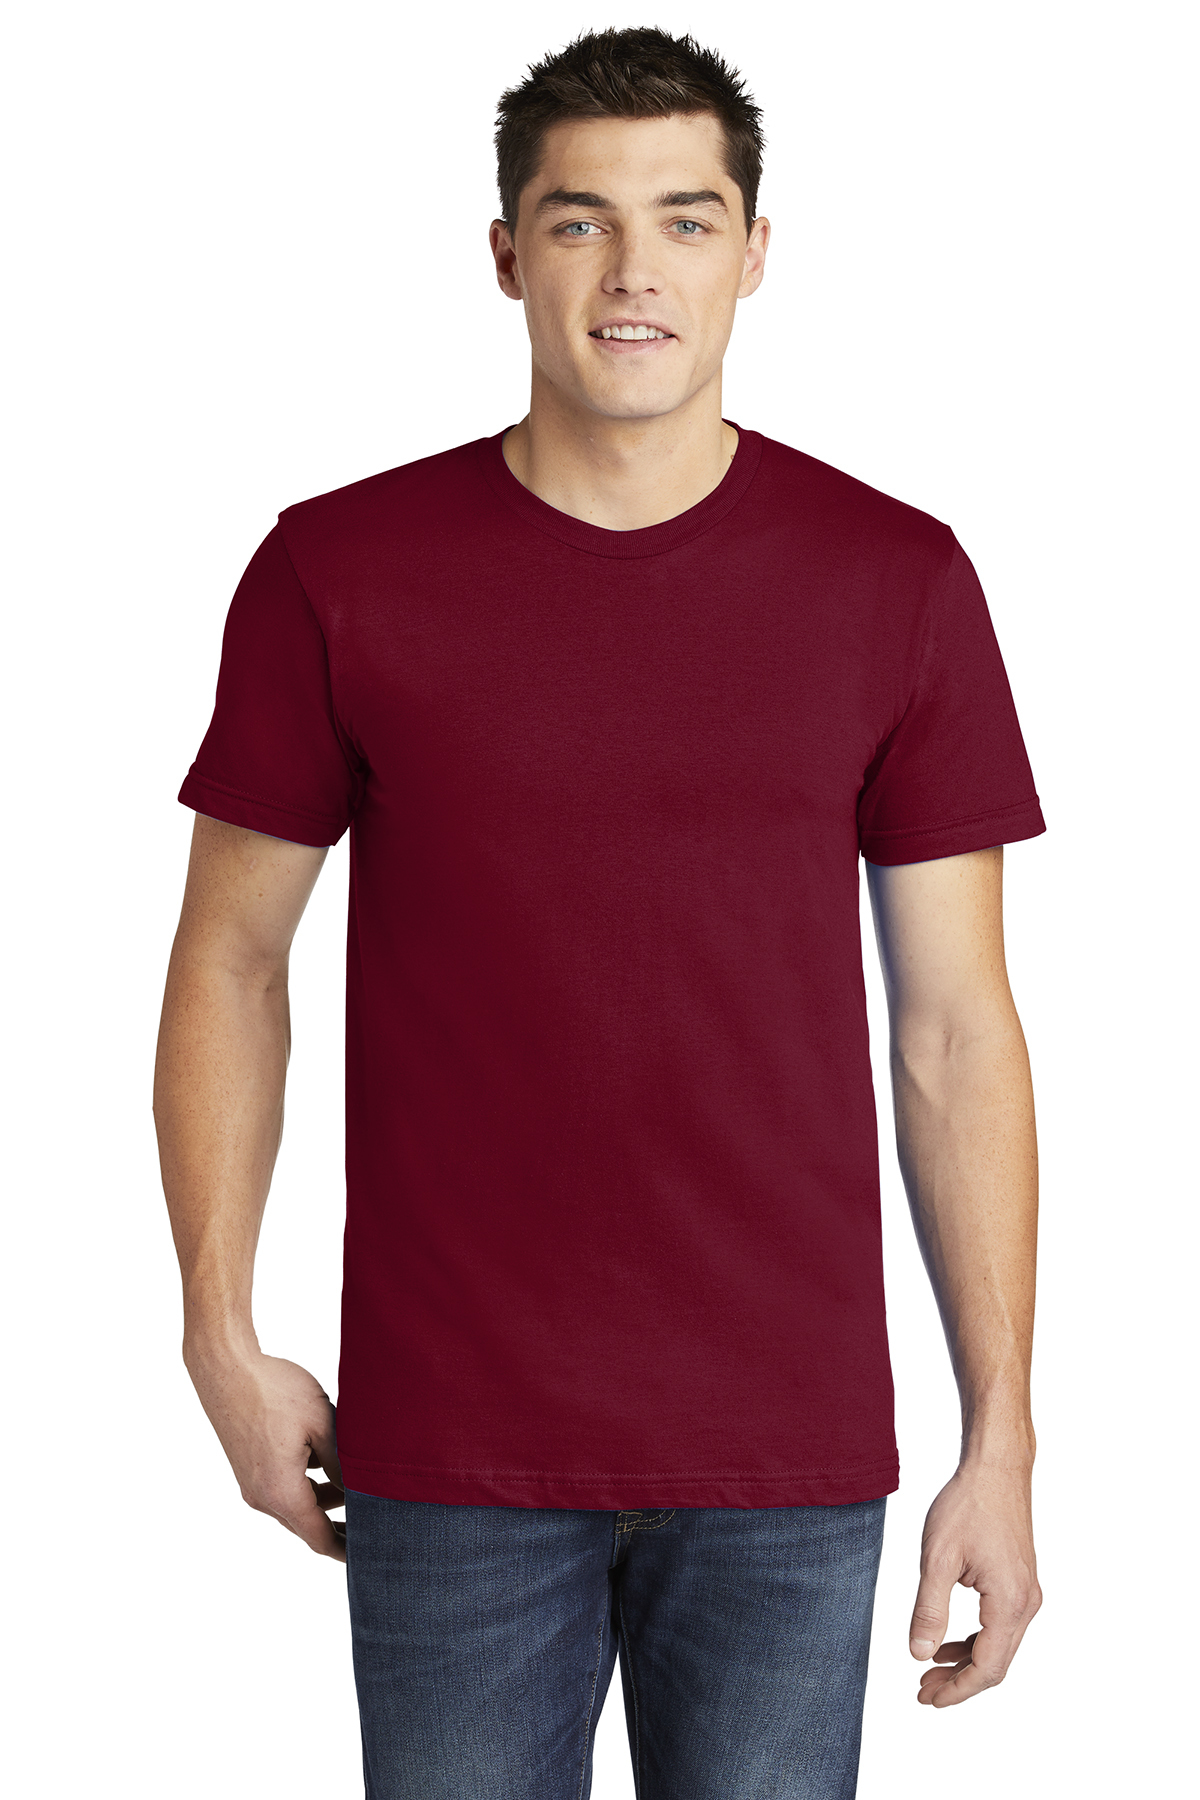 American Apparel USA Collection Fine Jersey T-Shirt | Product | SanMar